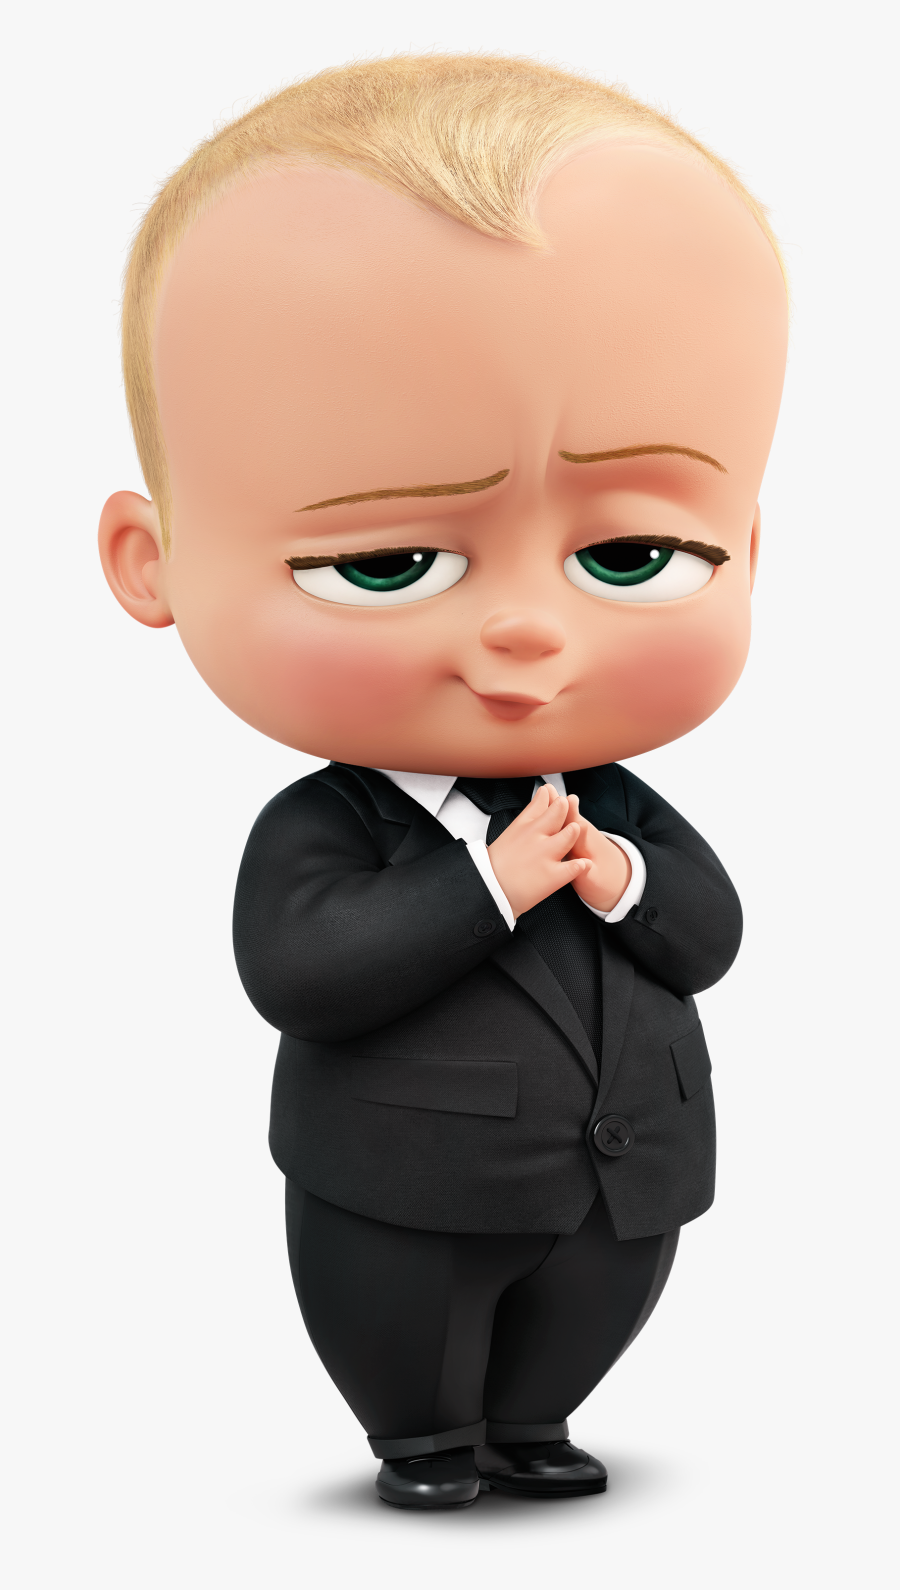 The Boss Baby Png File - Boss Baby Transparent, Transparent Clipart